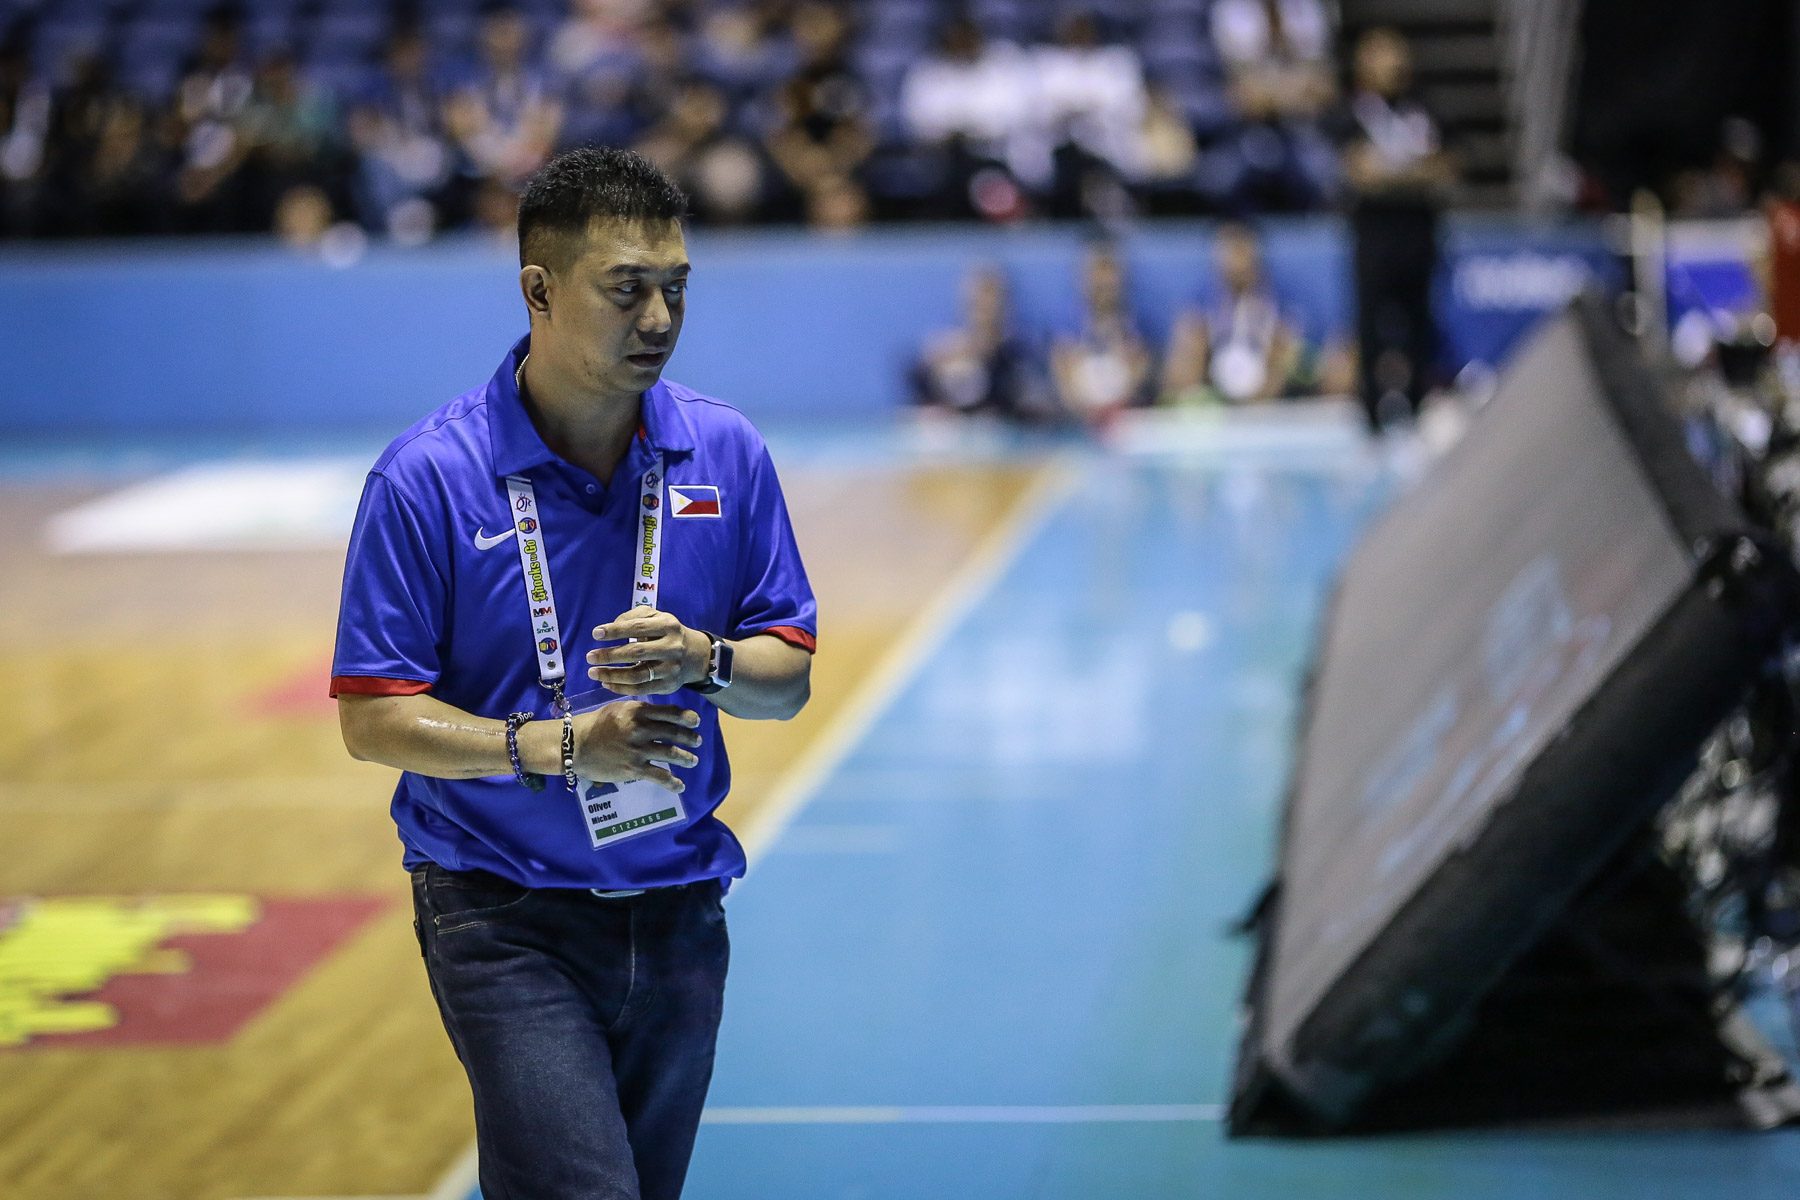 Coach Oliver unsatisfied with Batang Gilas performance against Indonesia